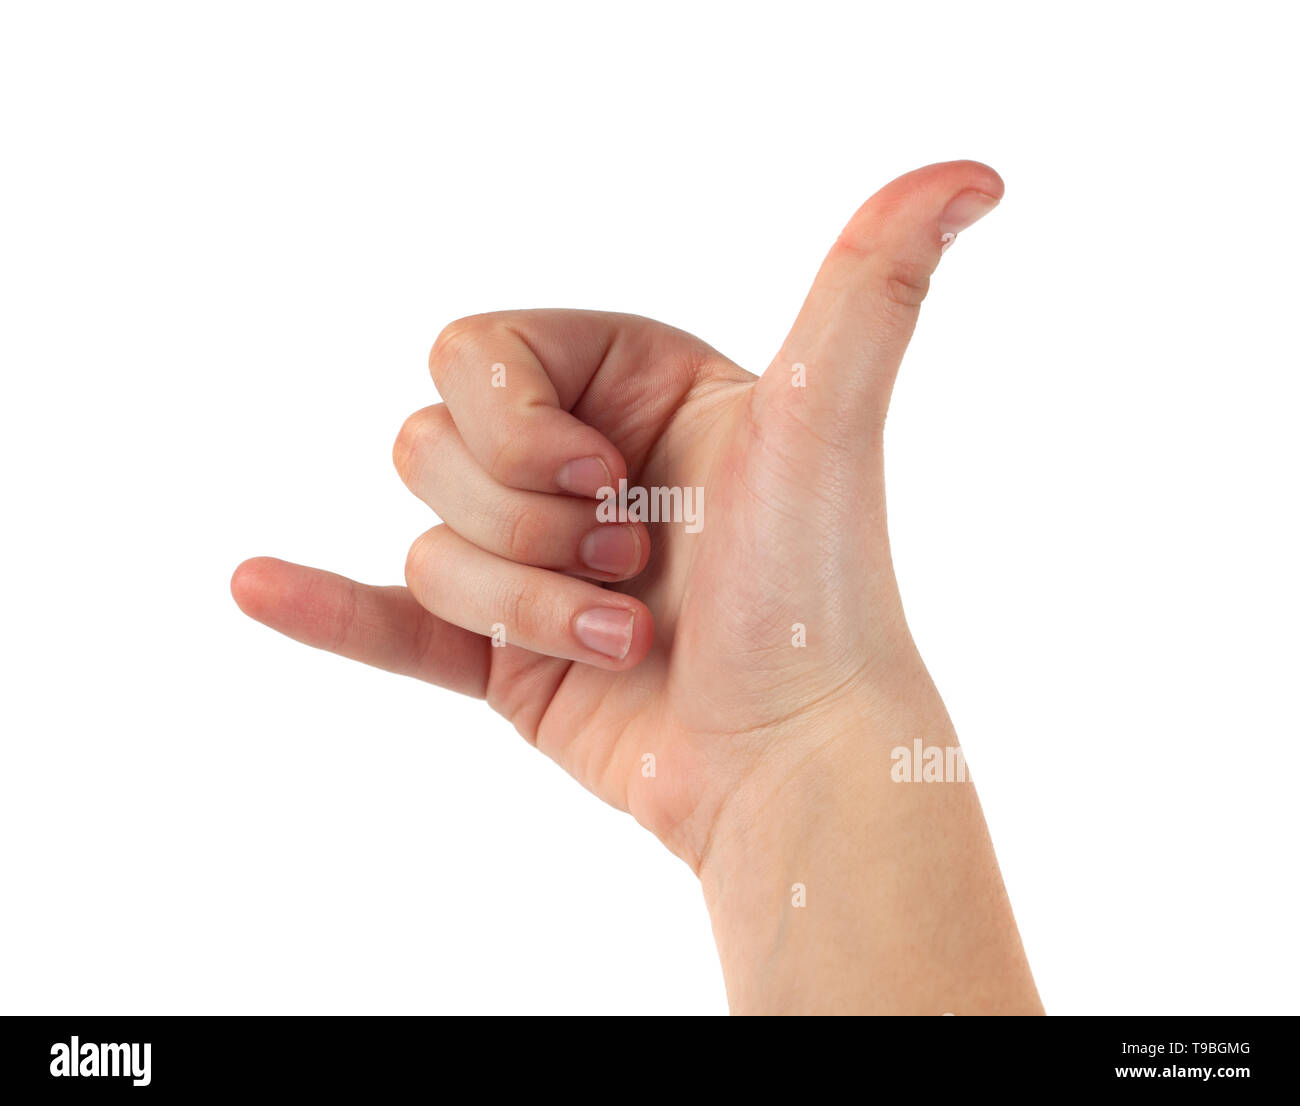 finger hand symbols isolated concept hand making a call phone, body Stock Photo